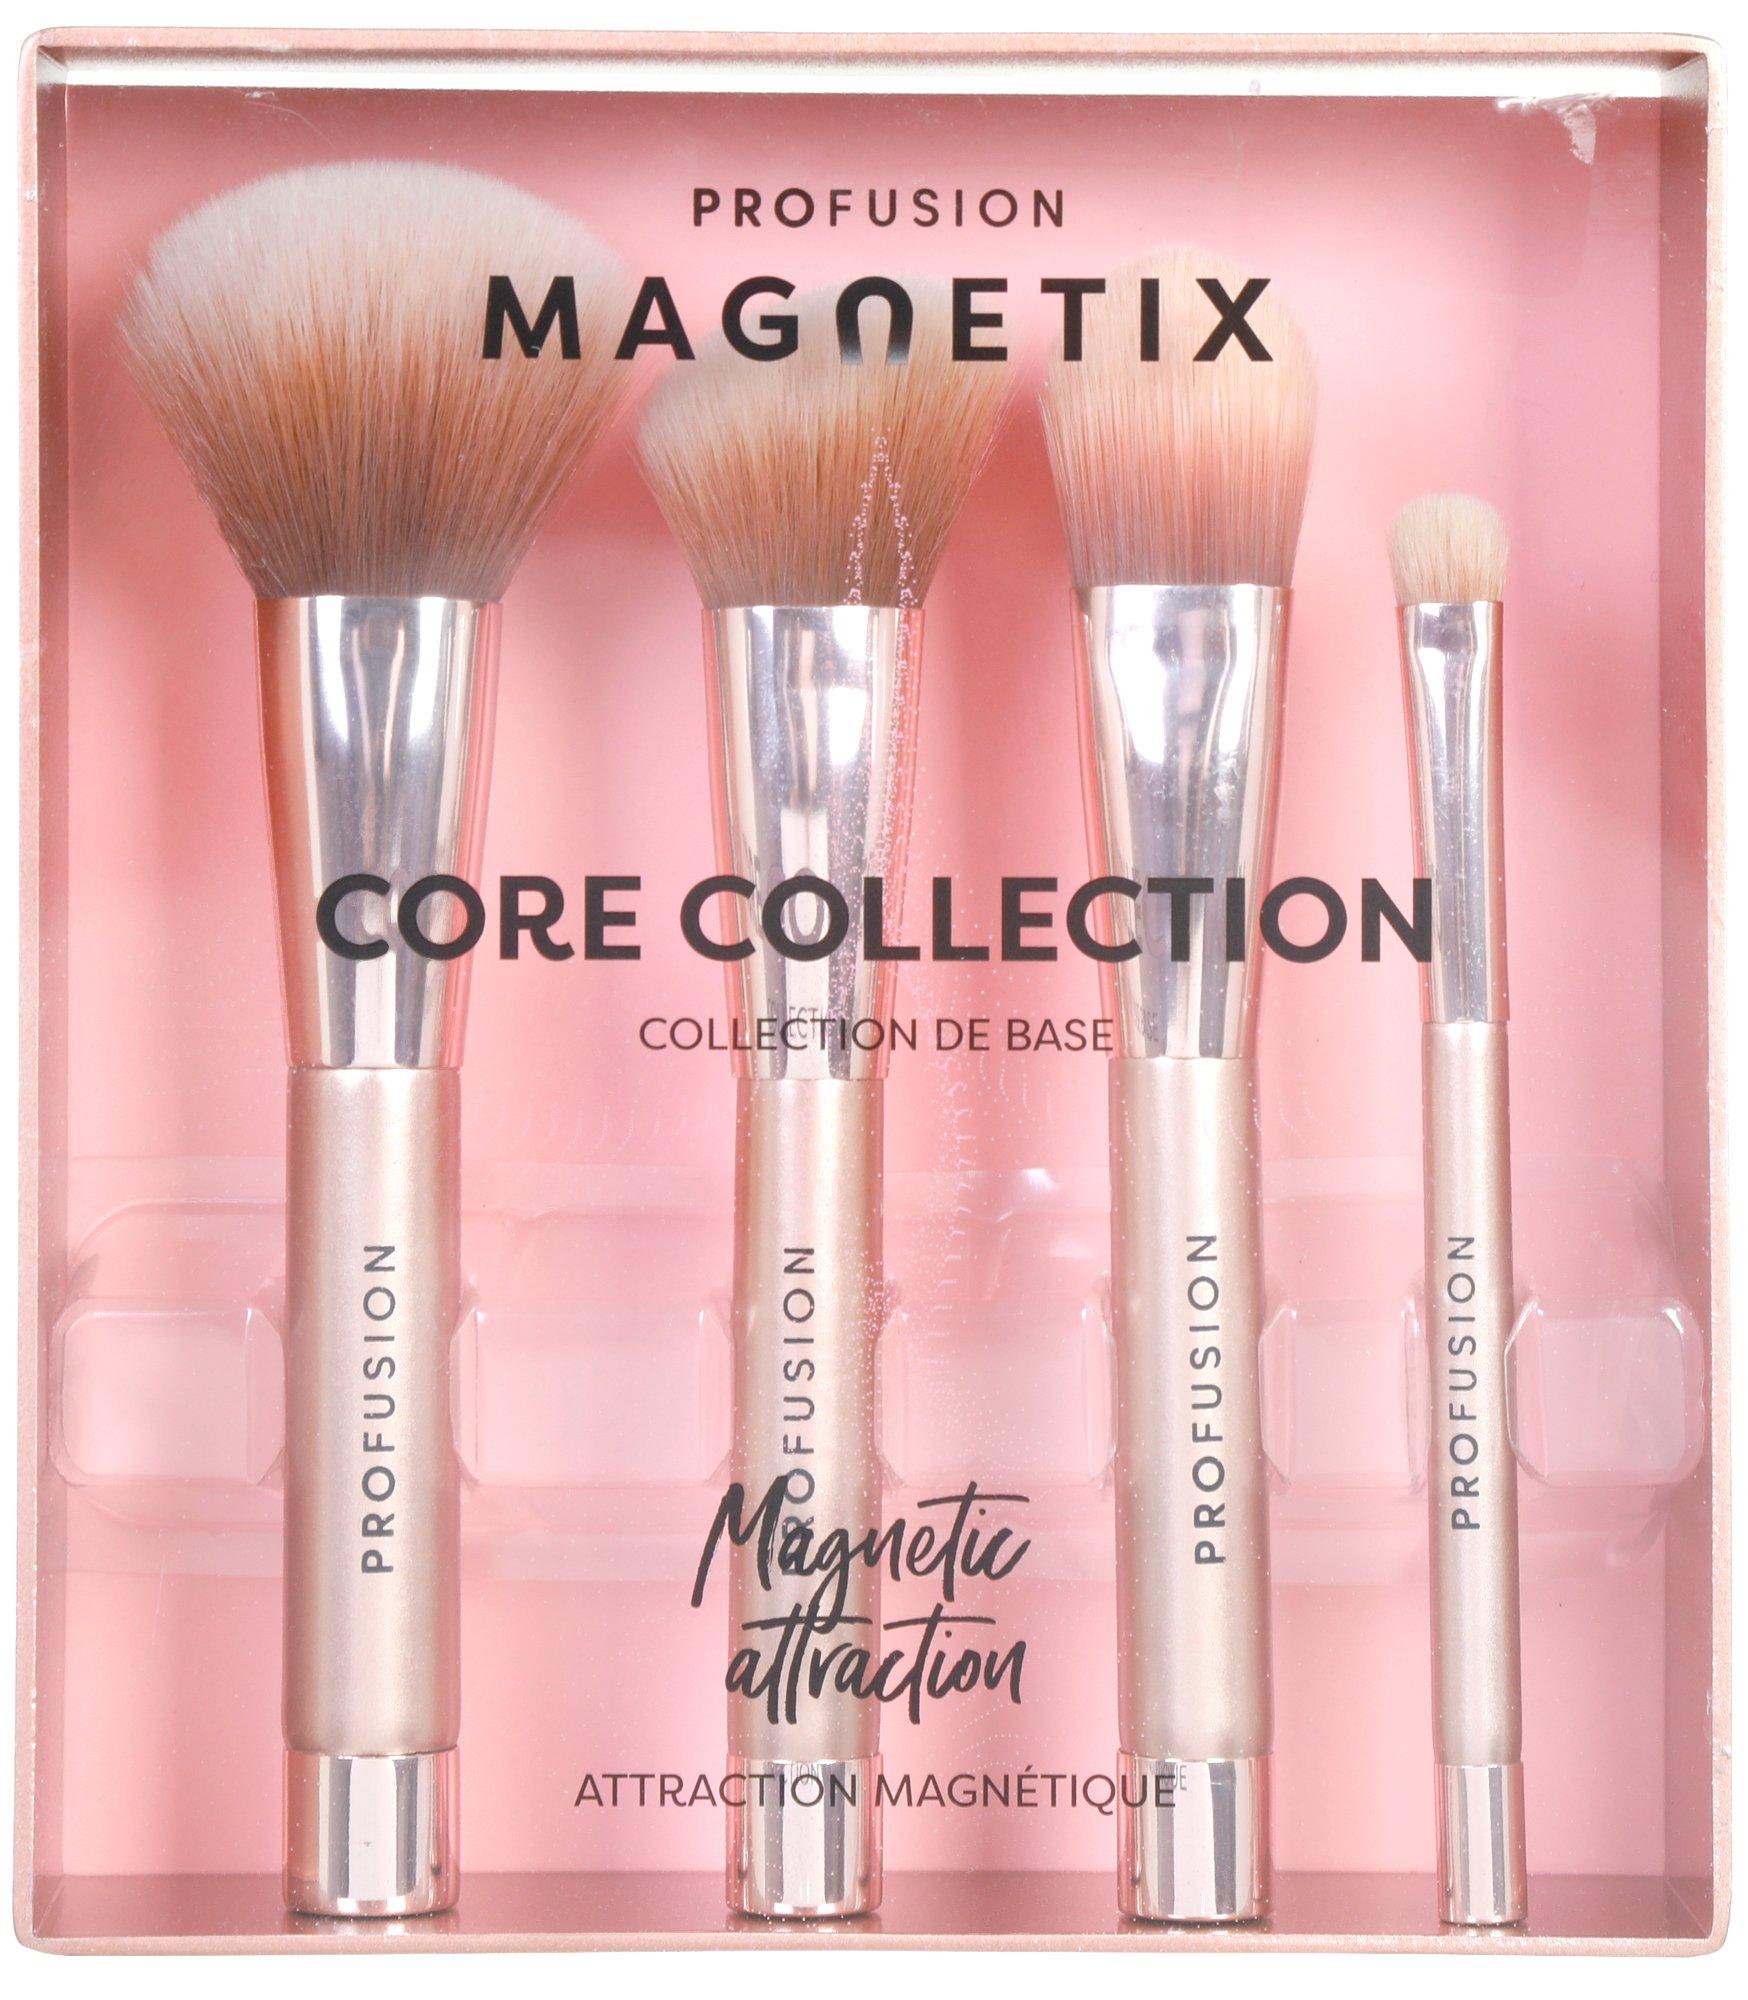 MAGNETIX CORE COLLECTION - Profusion Cosmetics